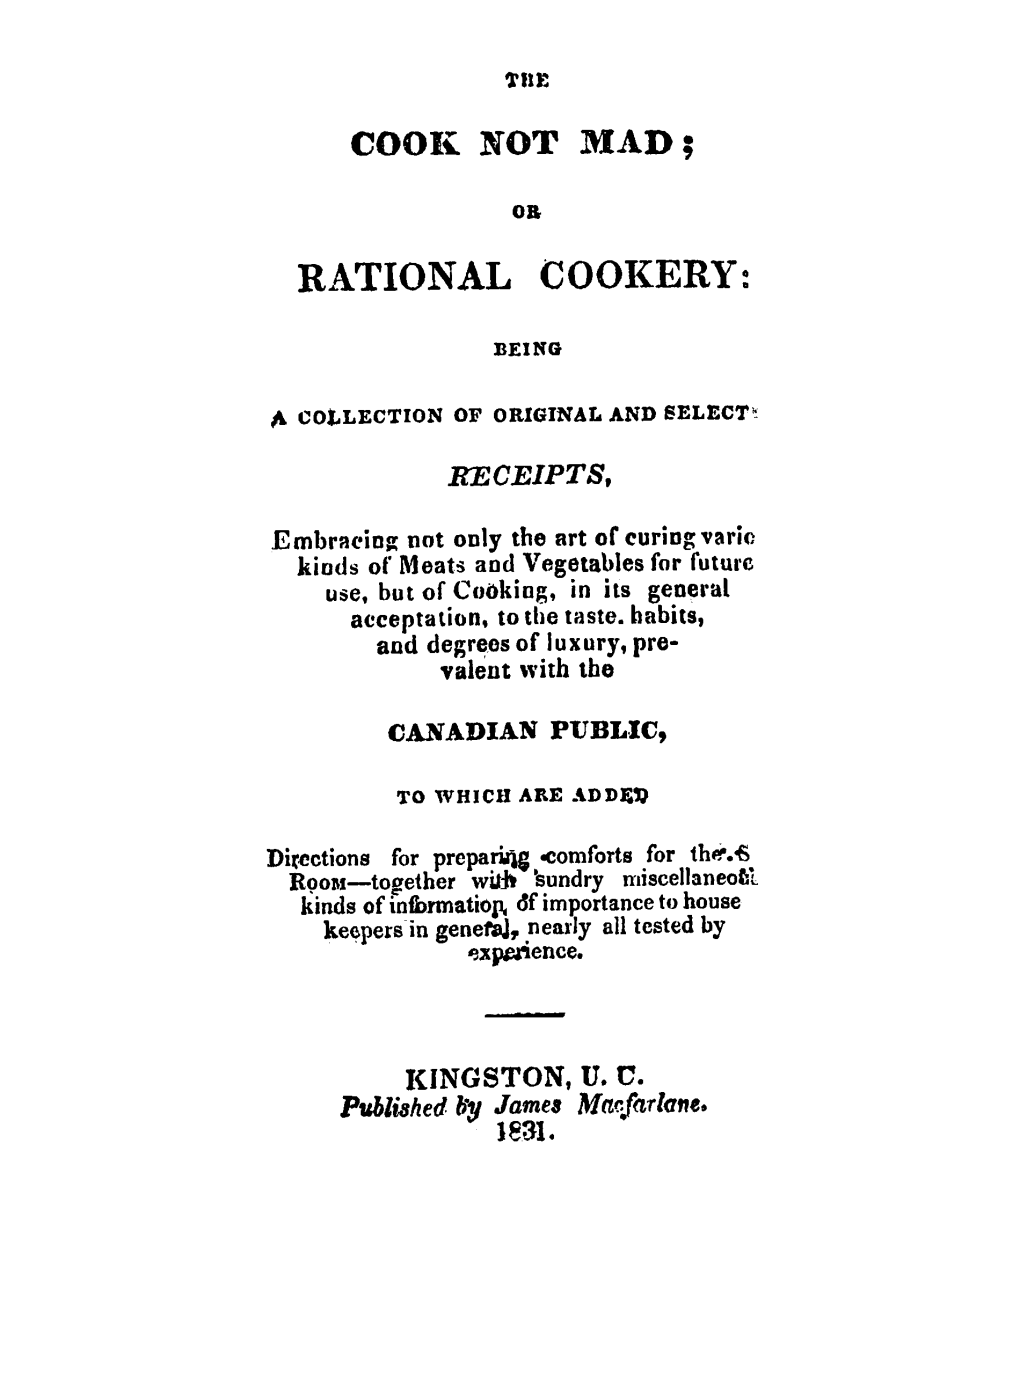 Rational Cookery